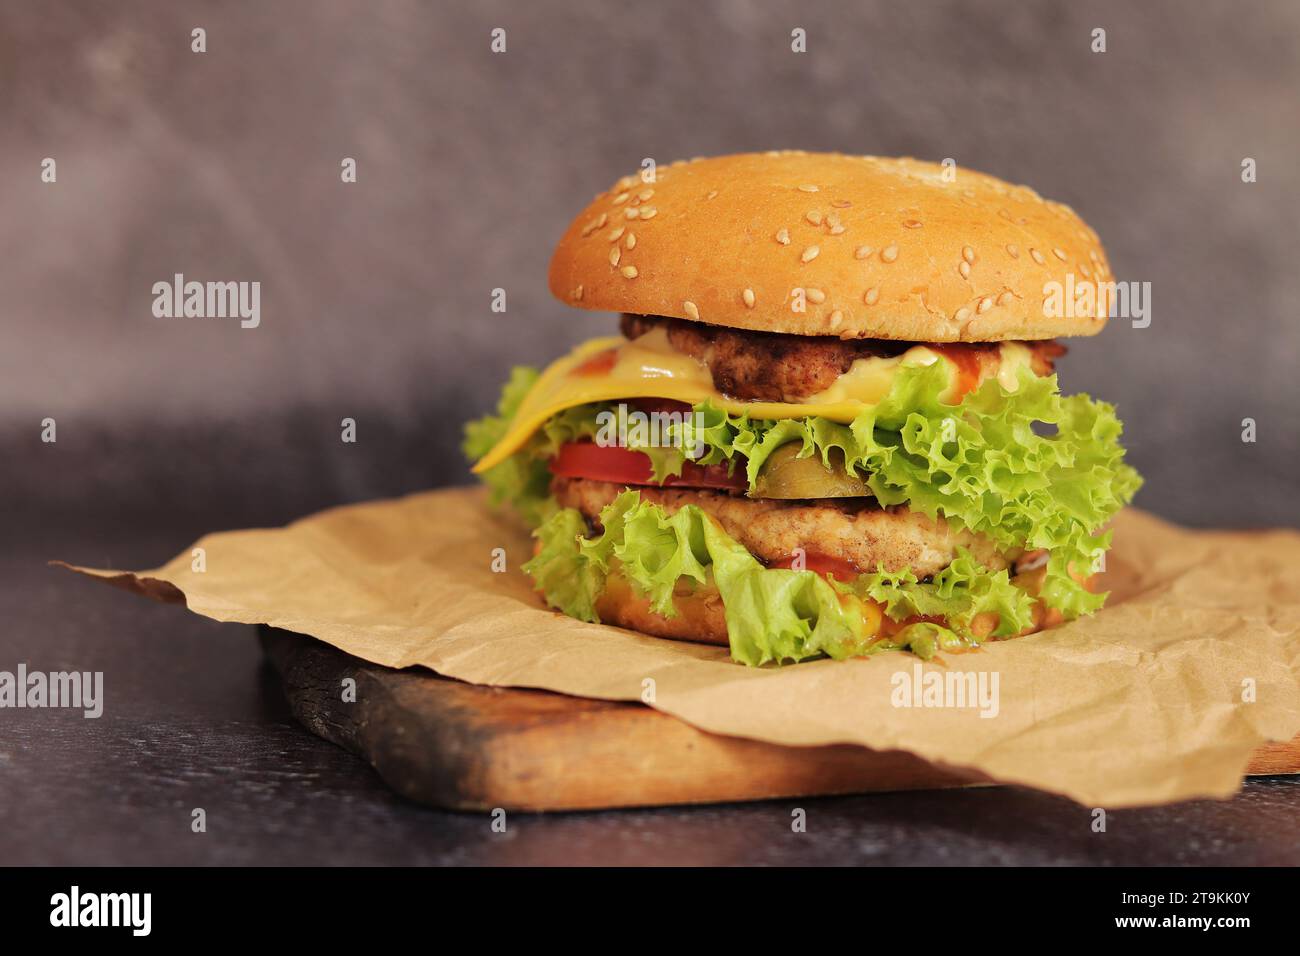 Double cheeseburger on a gray background. Juicy tasty burger on craft paper, side view. Fast food. Copy space Stock Photo